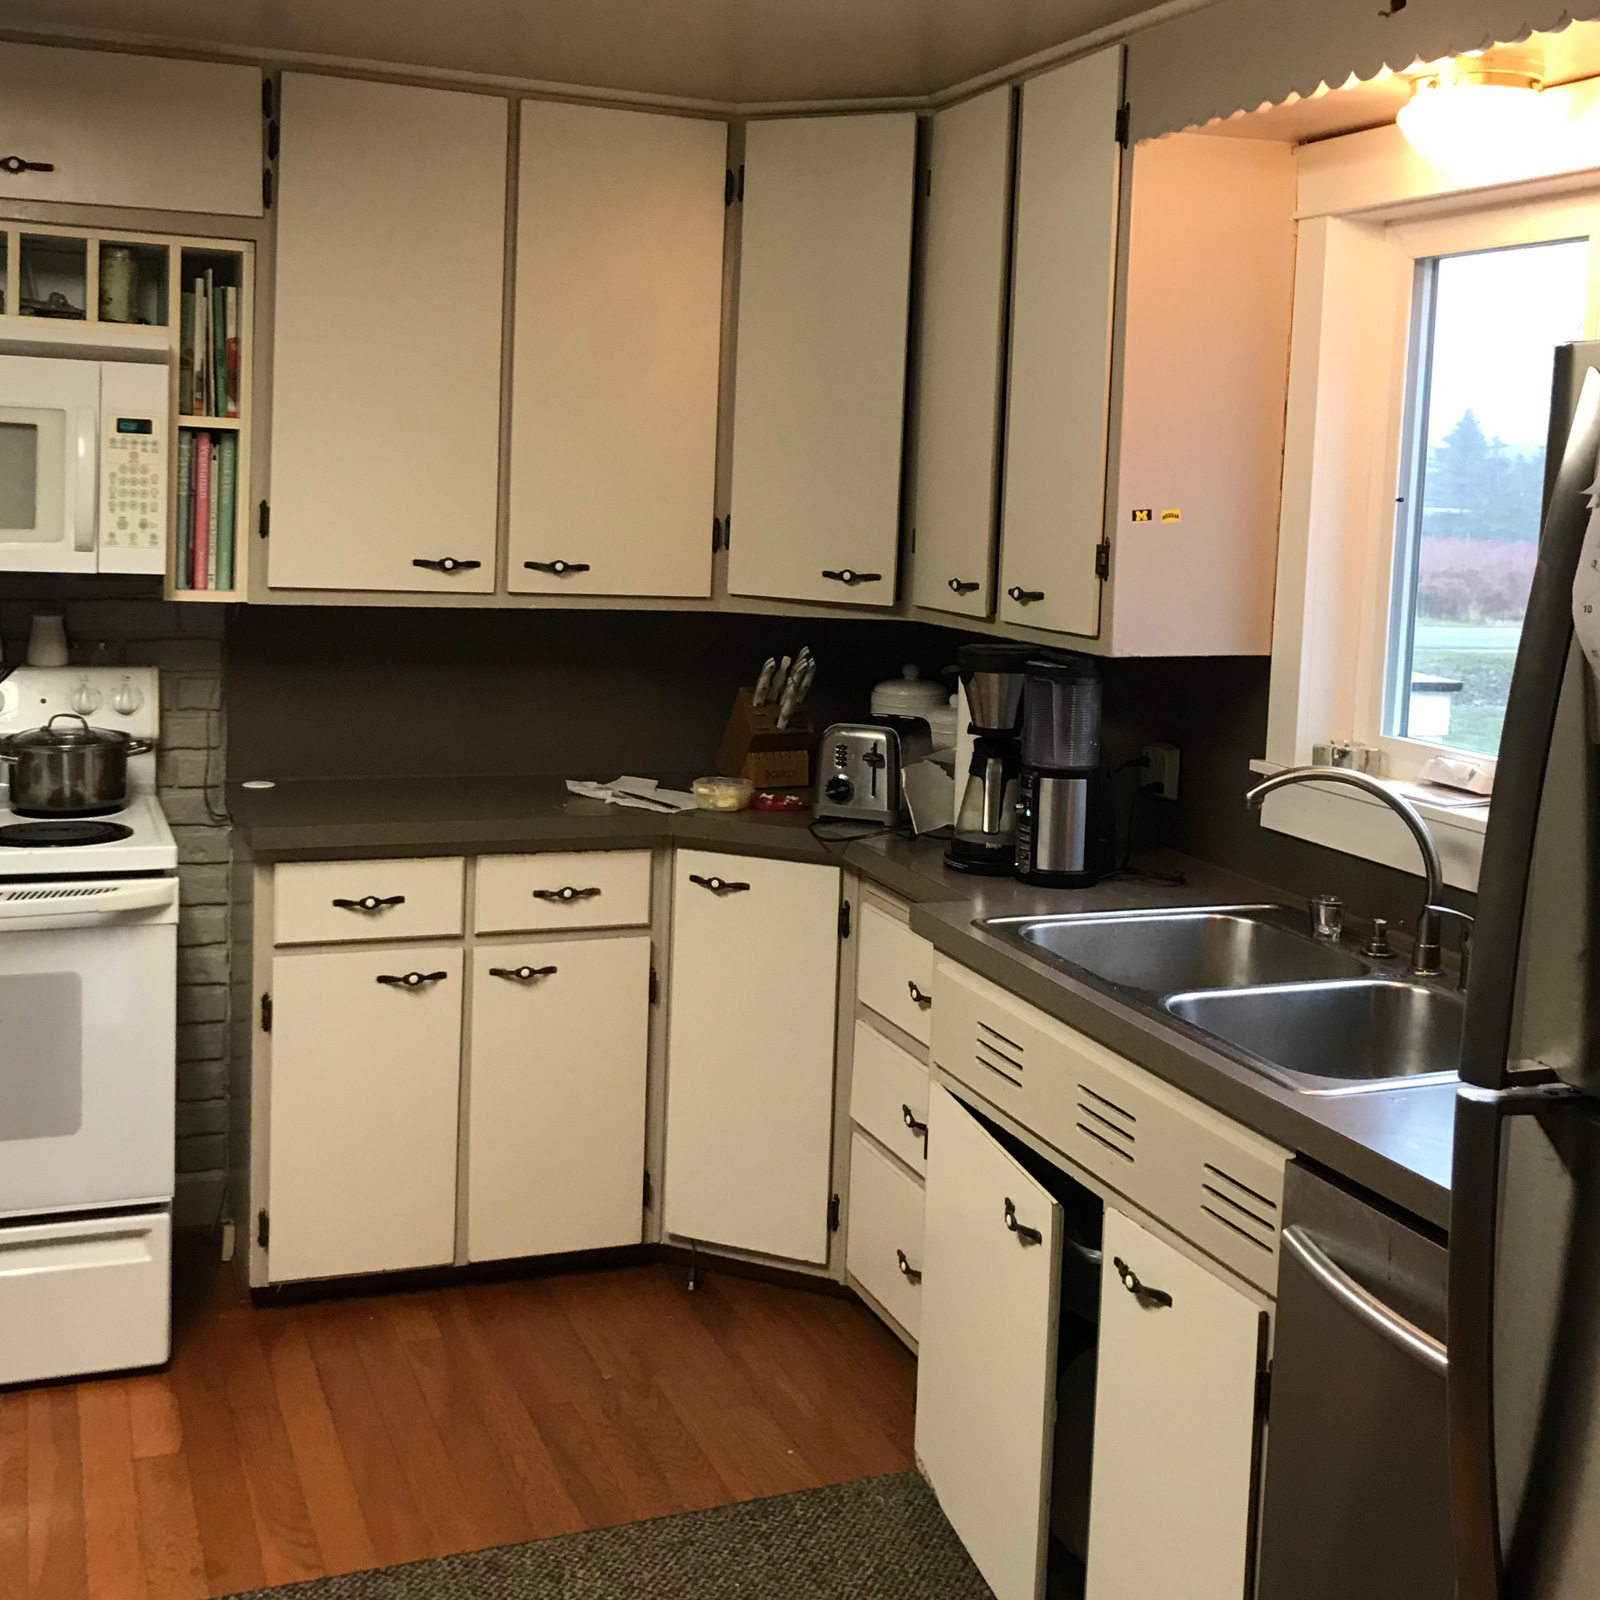 Entry 133 - This 1964 Sears kitchen seen it’s day